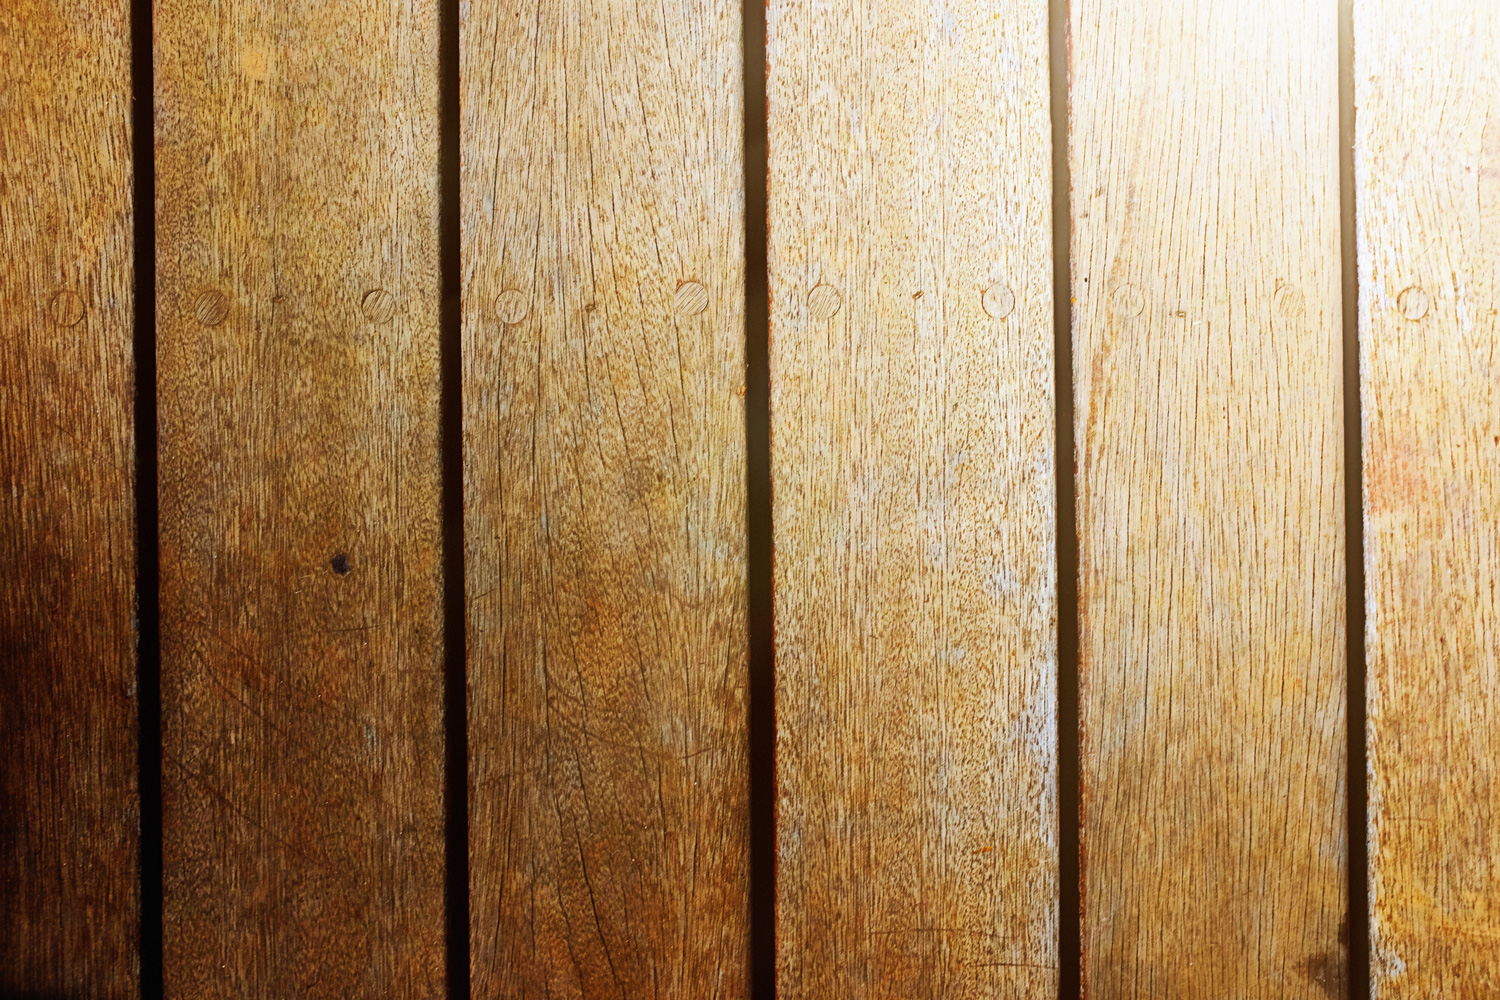 Textured wooden decking background with lighting going from light to dark.